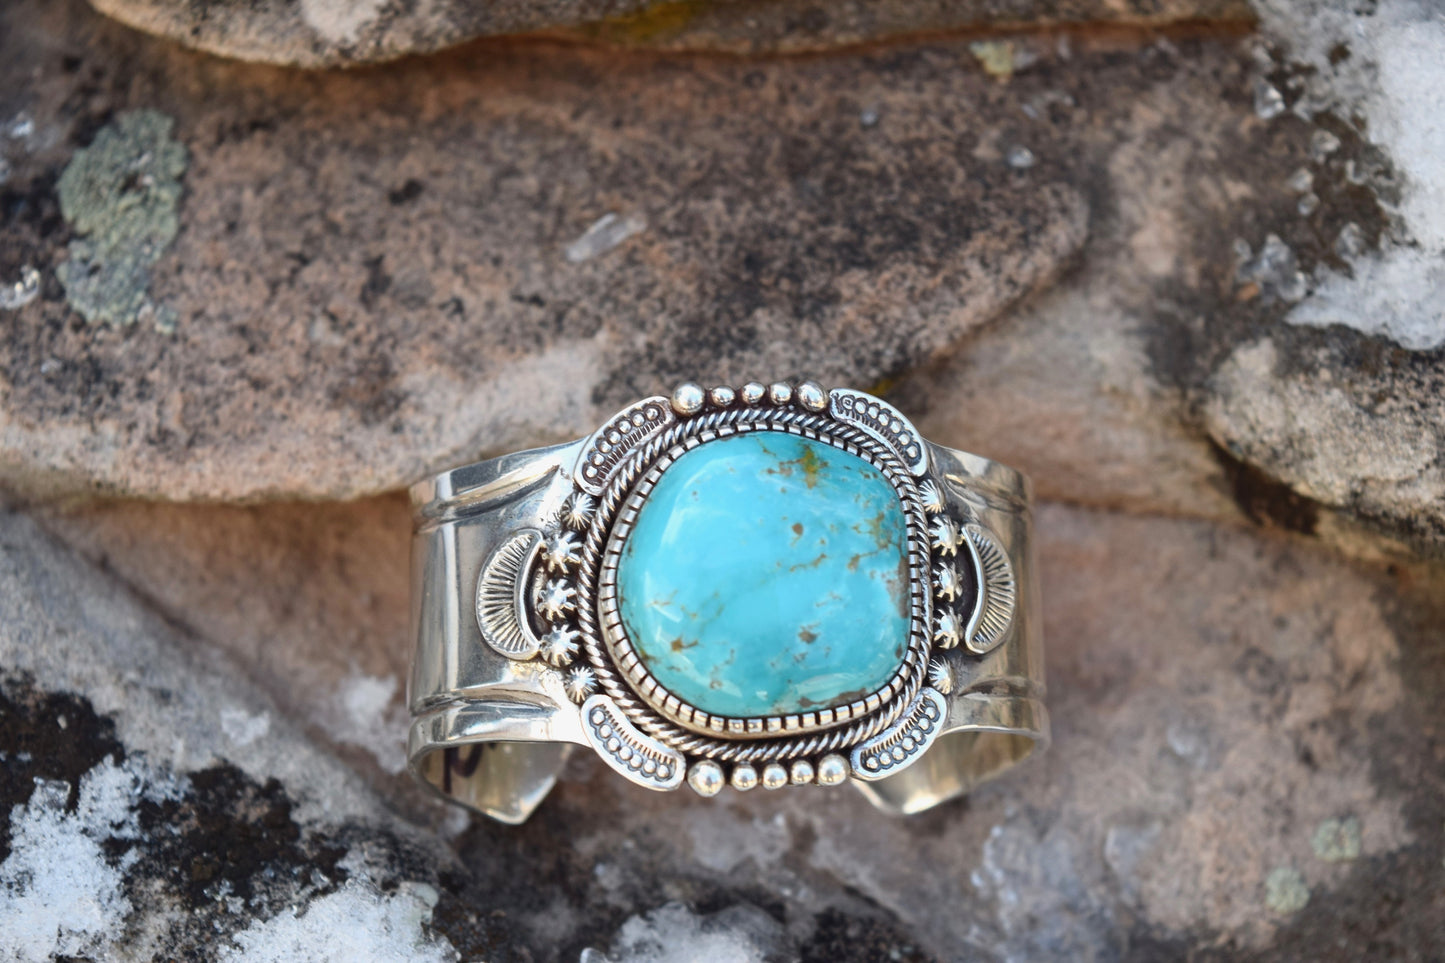 SQUARE ROUND KINGMAN TURQUOISE BRACELET FROM THE RODGERS COLLECTION